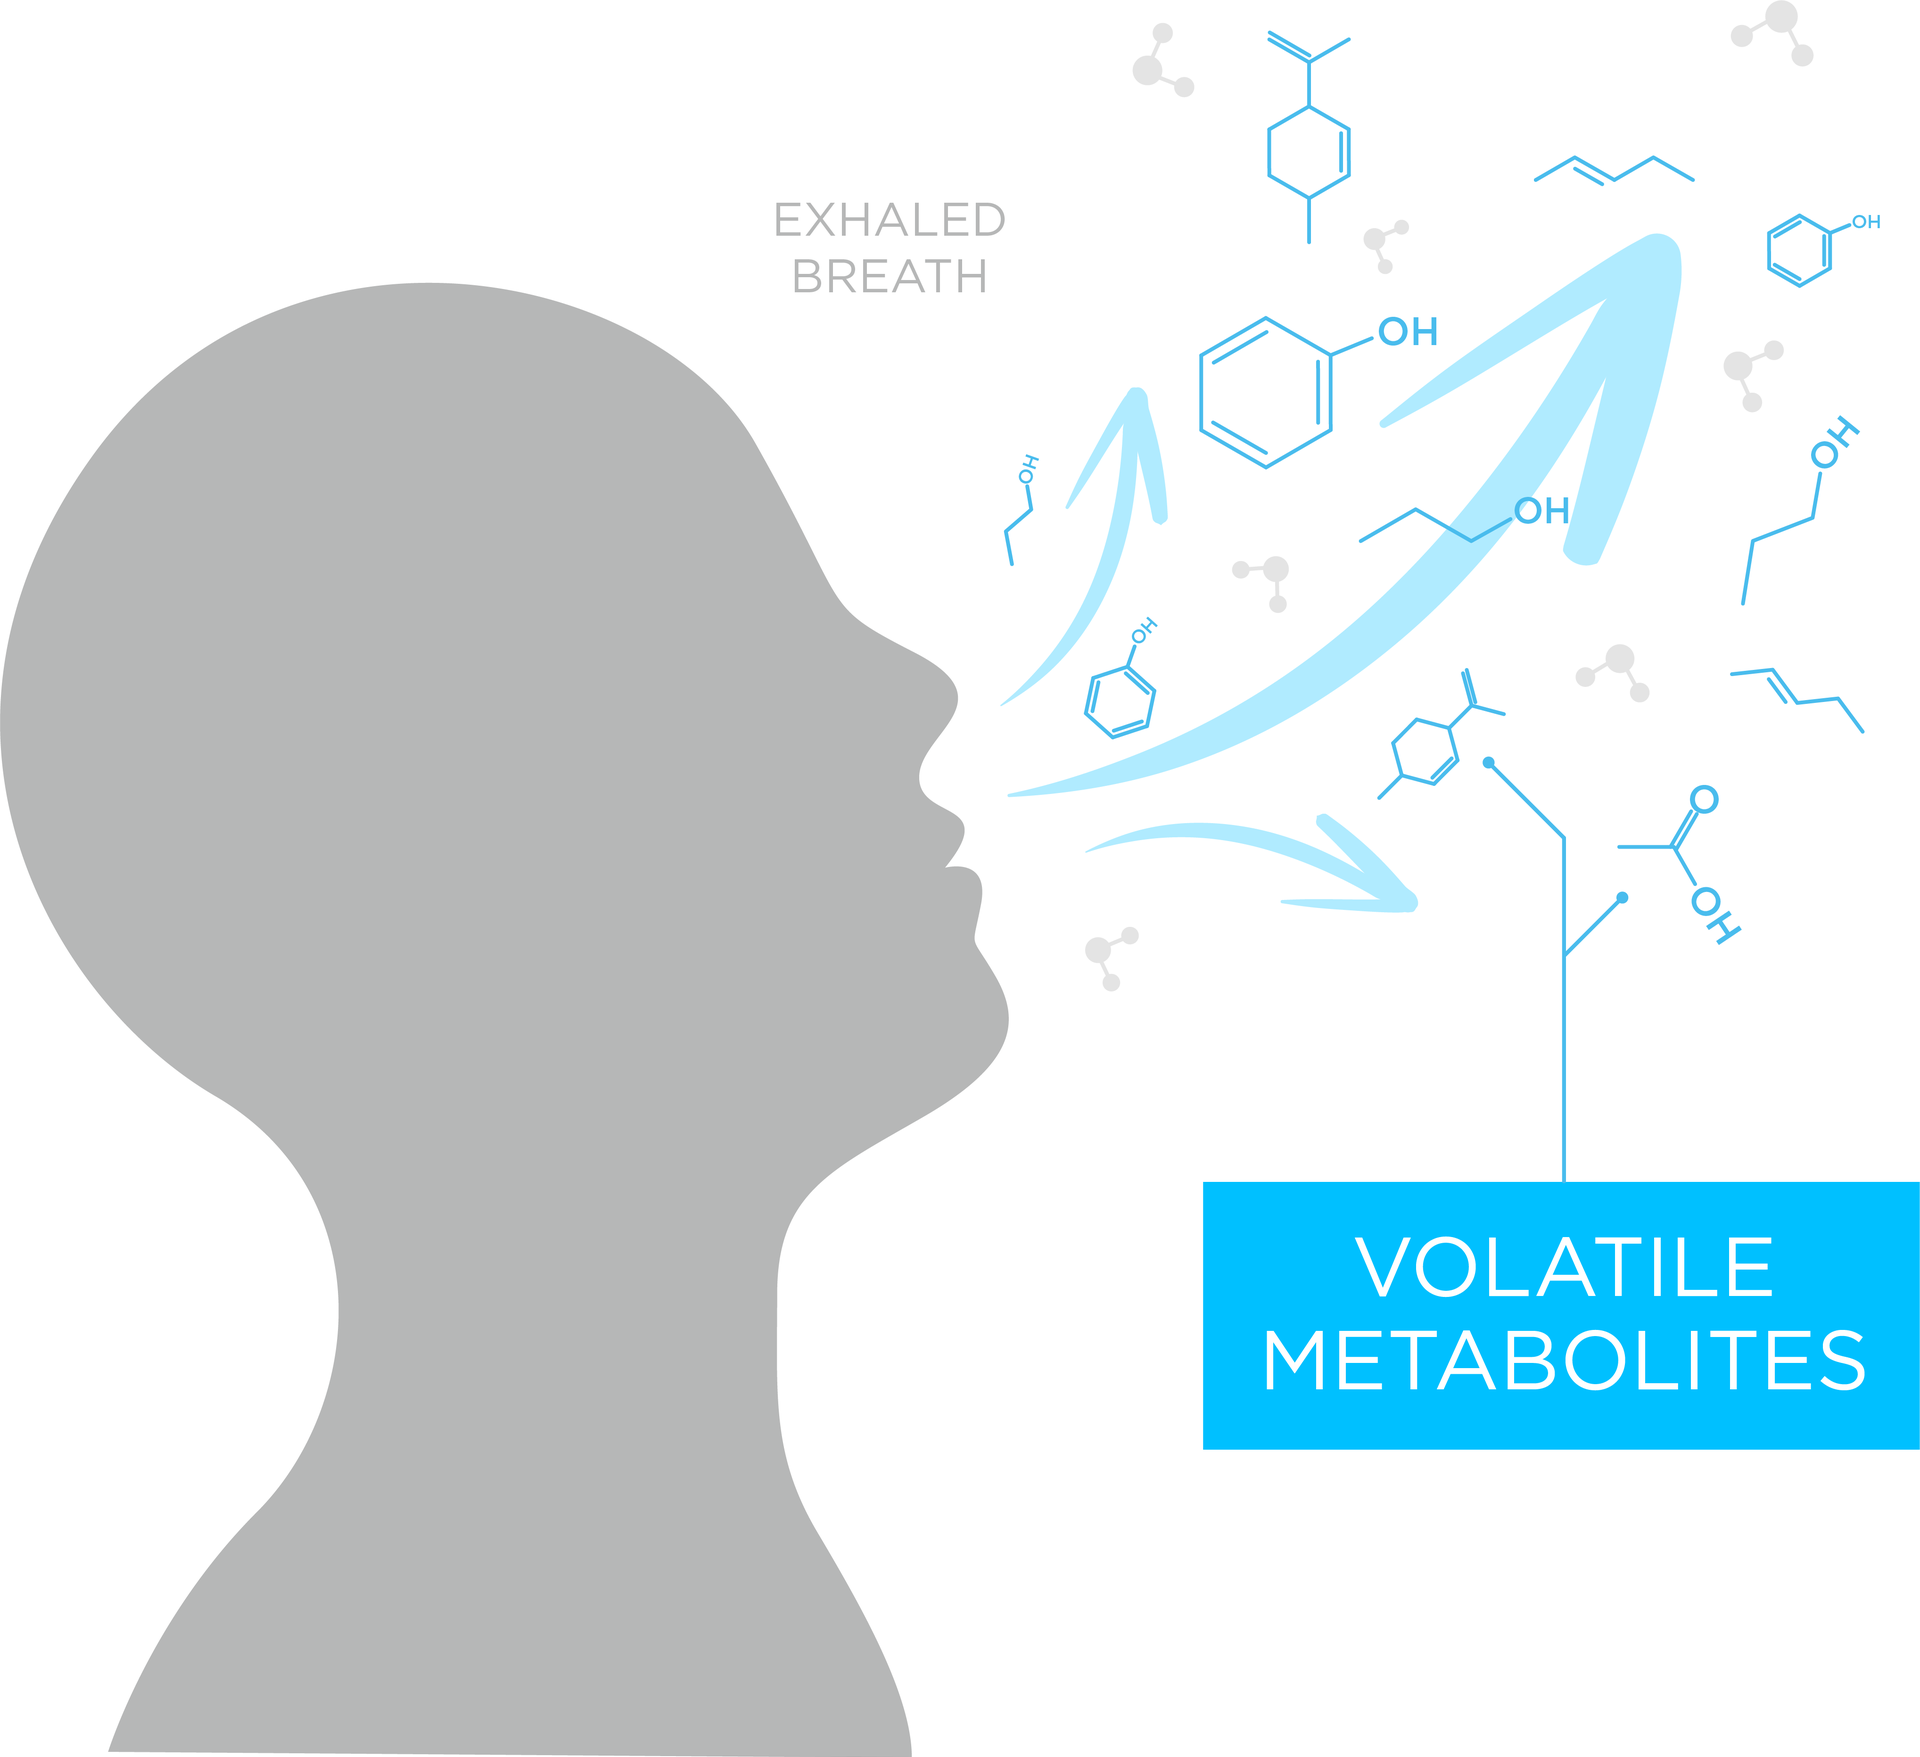 A graphic showing someone exhaling volatile metabolites into the air